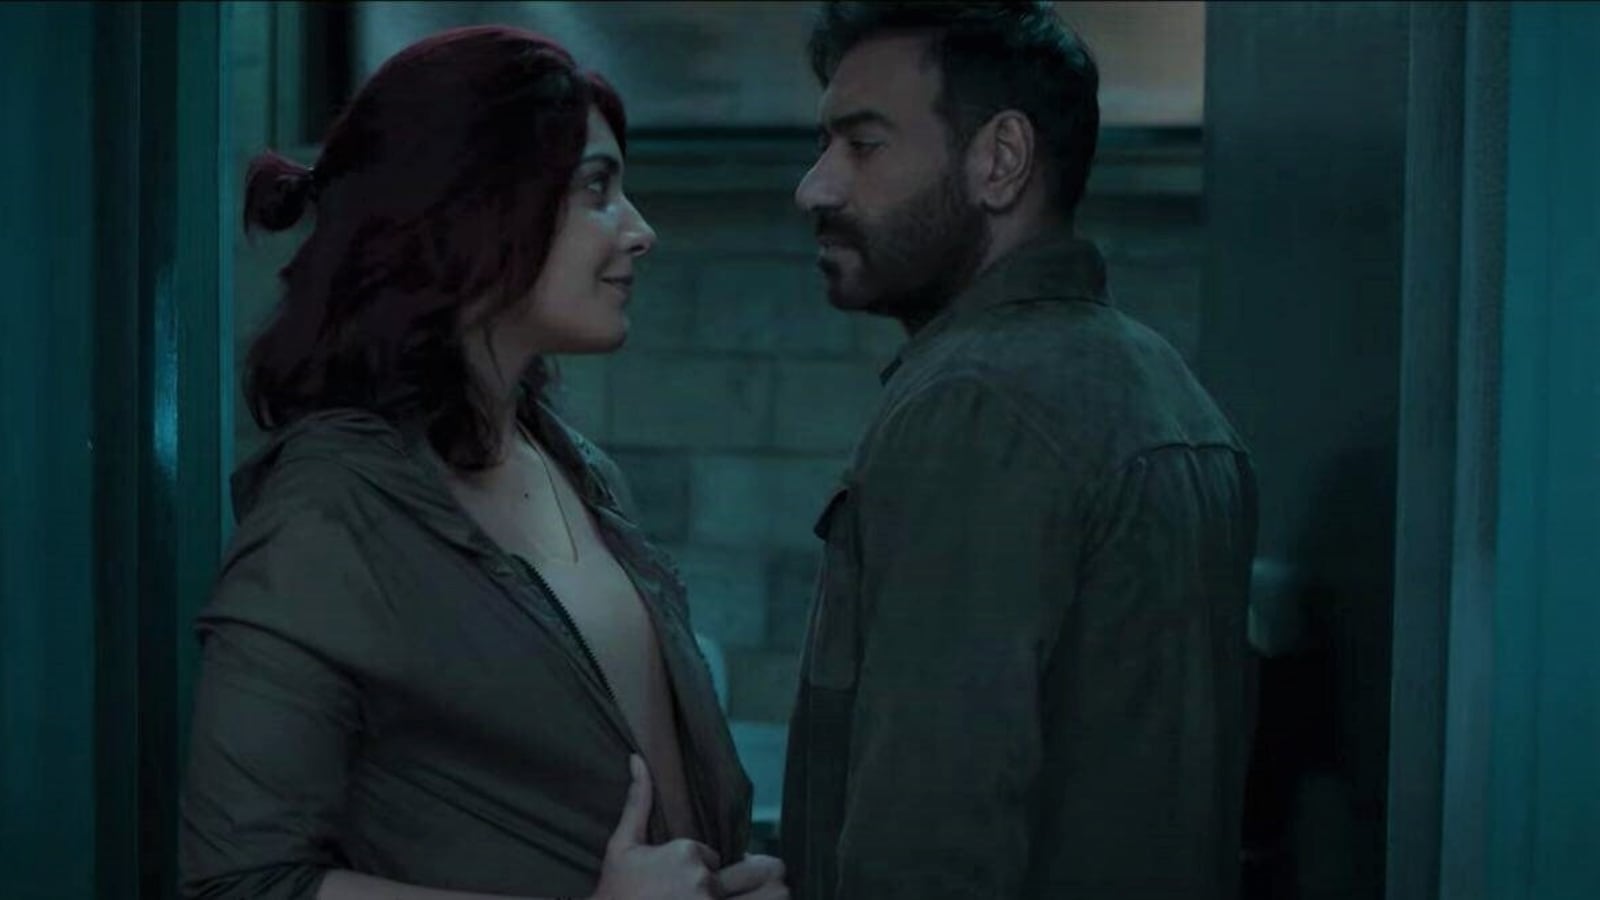 Ajay Devgn Xxx Hd - Rudra review: Ajay Devgn is superb in well-made crime series | Web Series -  Hindustan Times